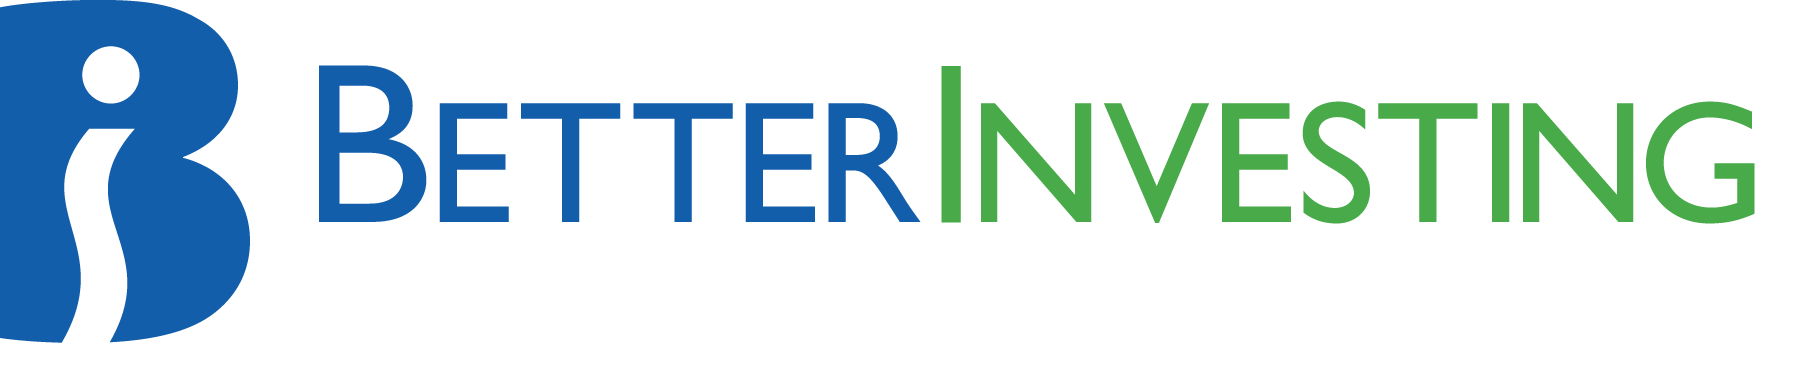 betterinvesting-rev.png